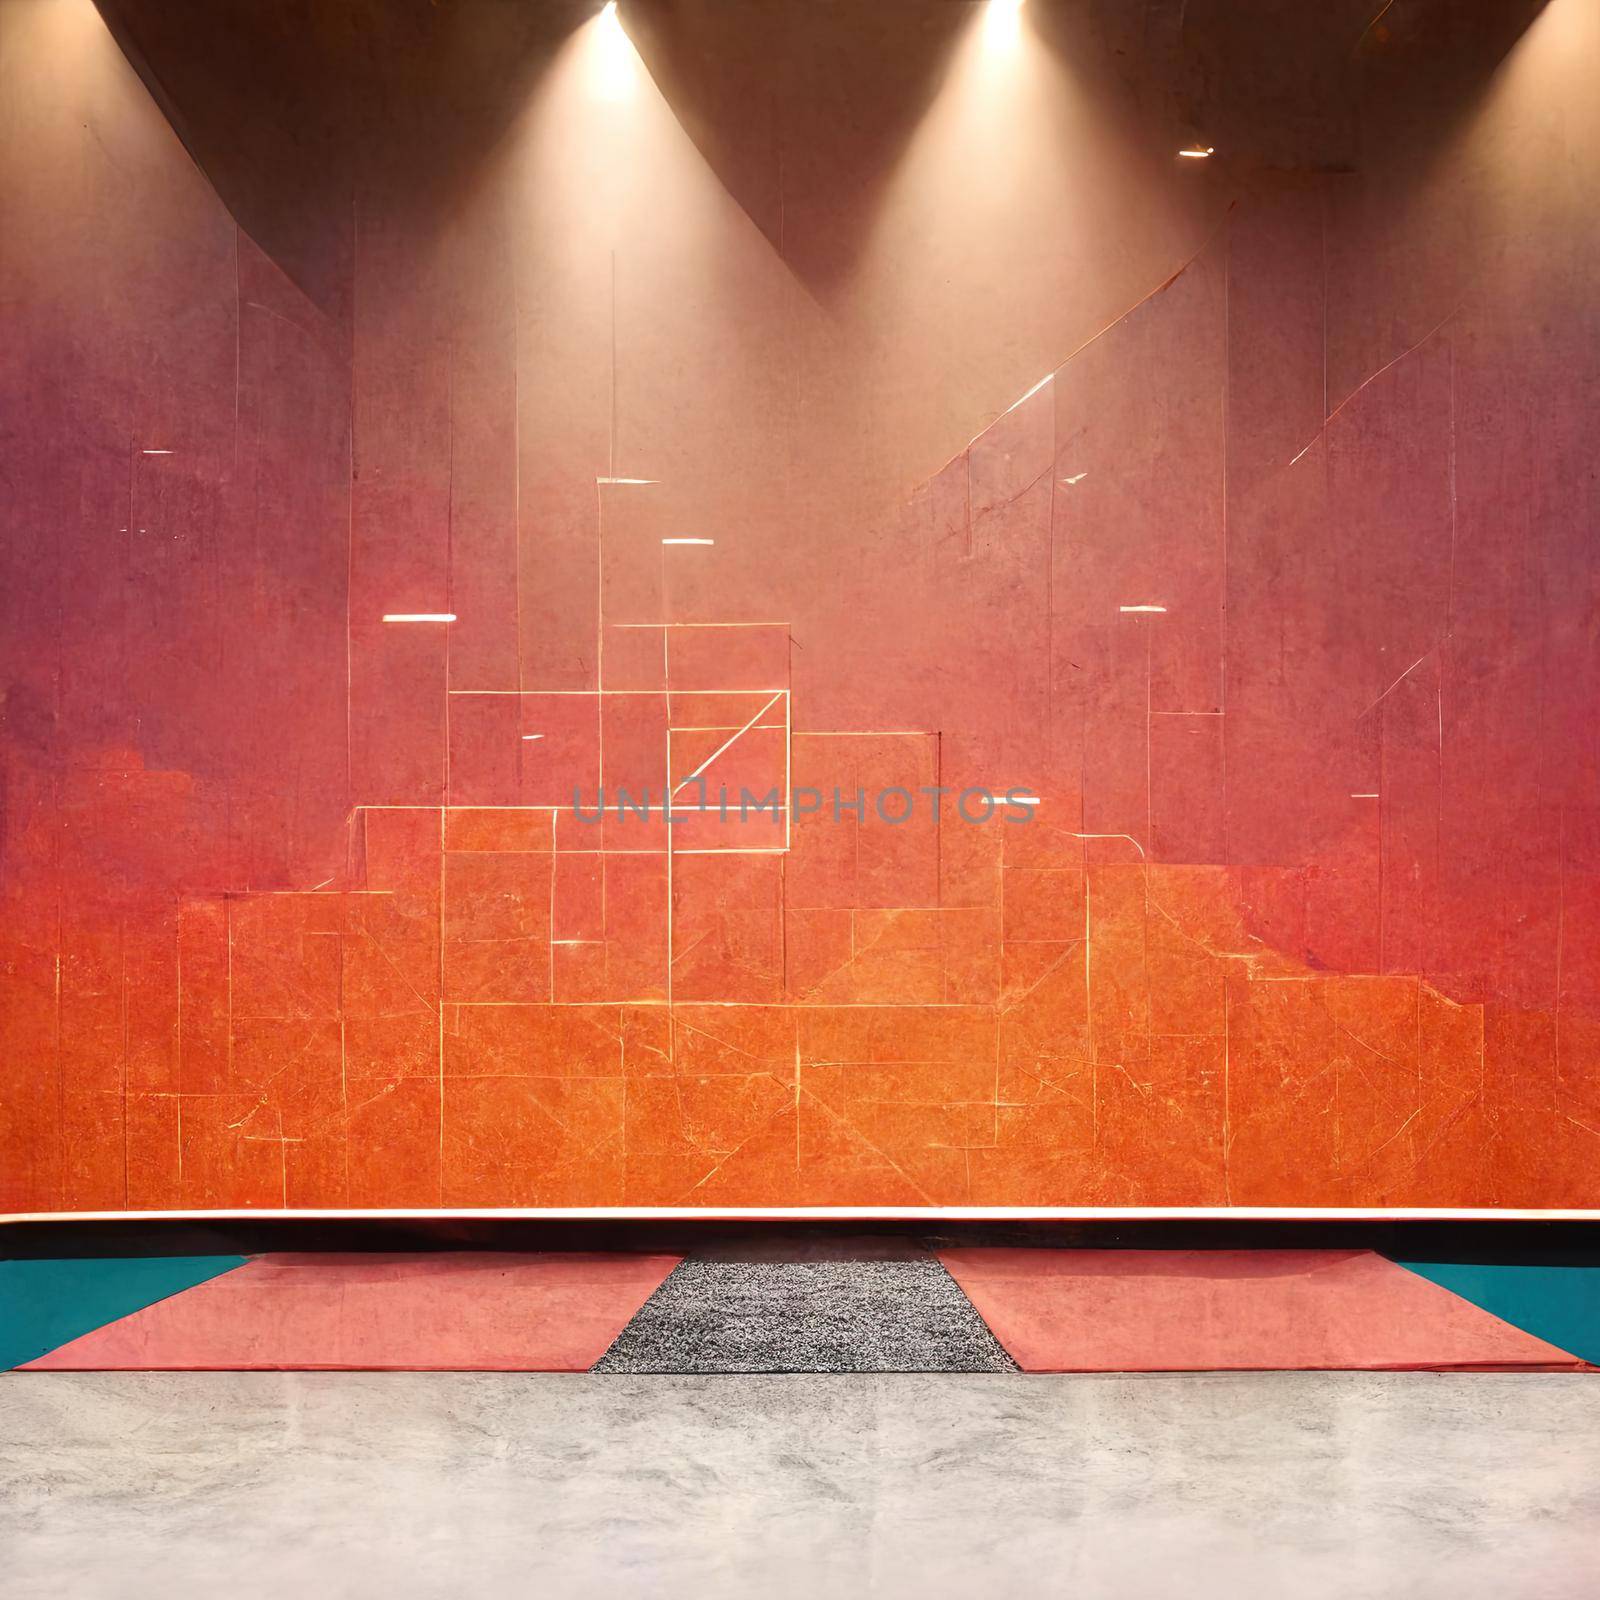 3d rendering studio with geometric shapes, podium on the floor. Platforms for product presentation, mock up background. Abstract composition in minimal design